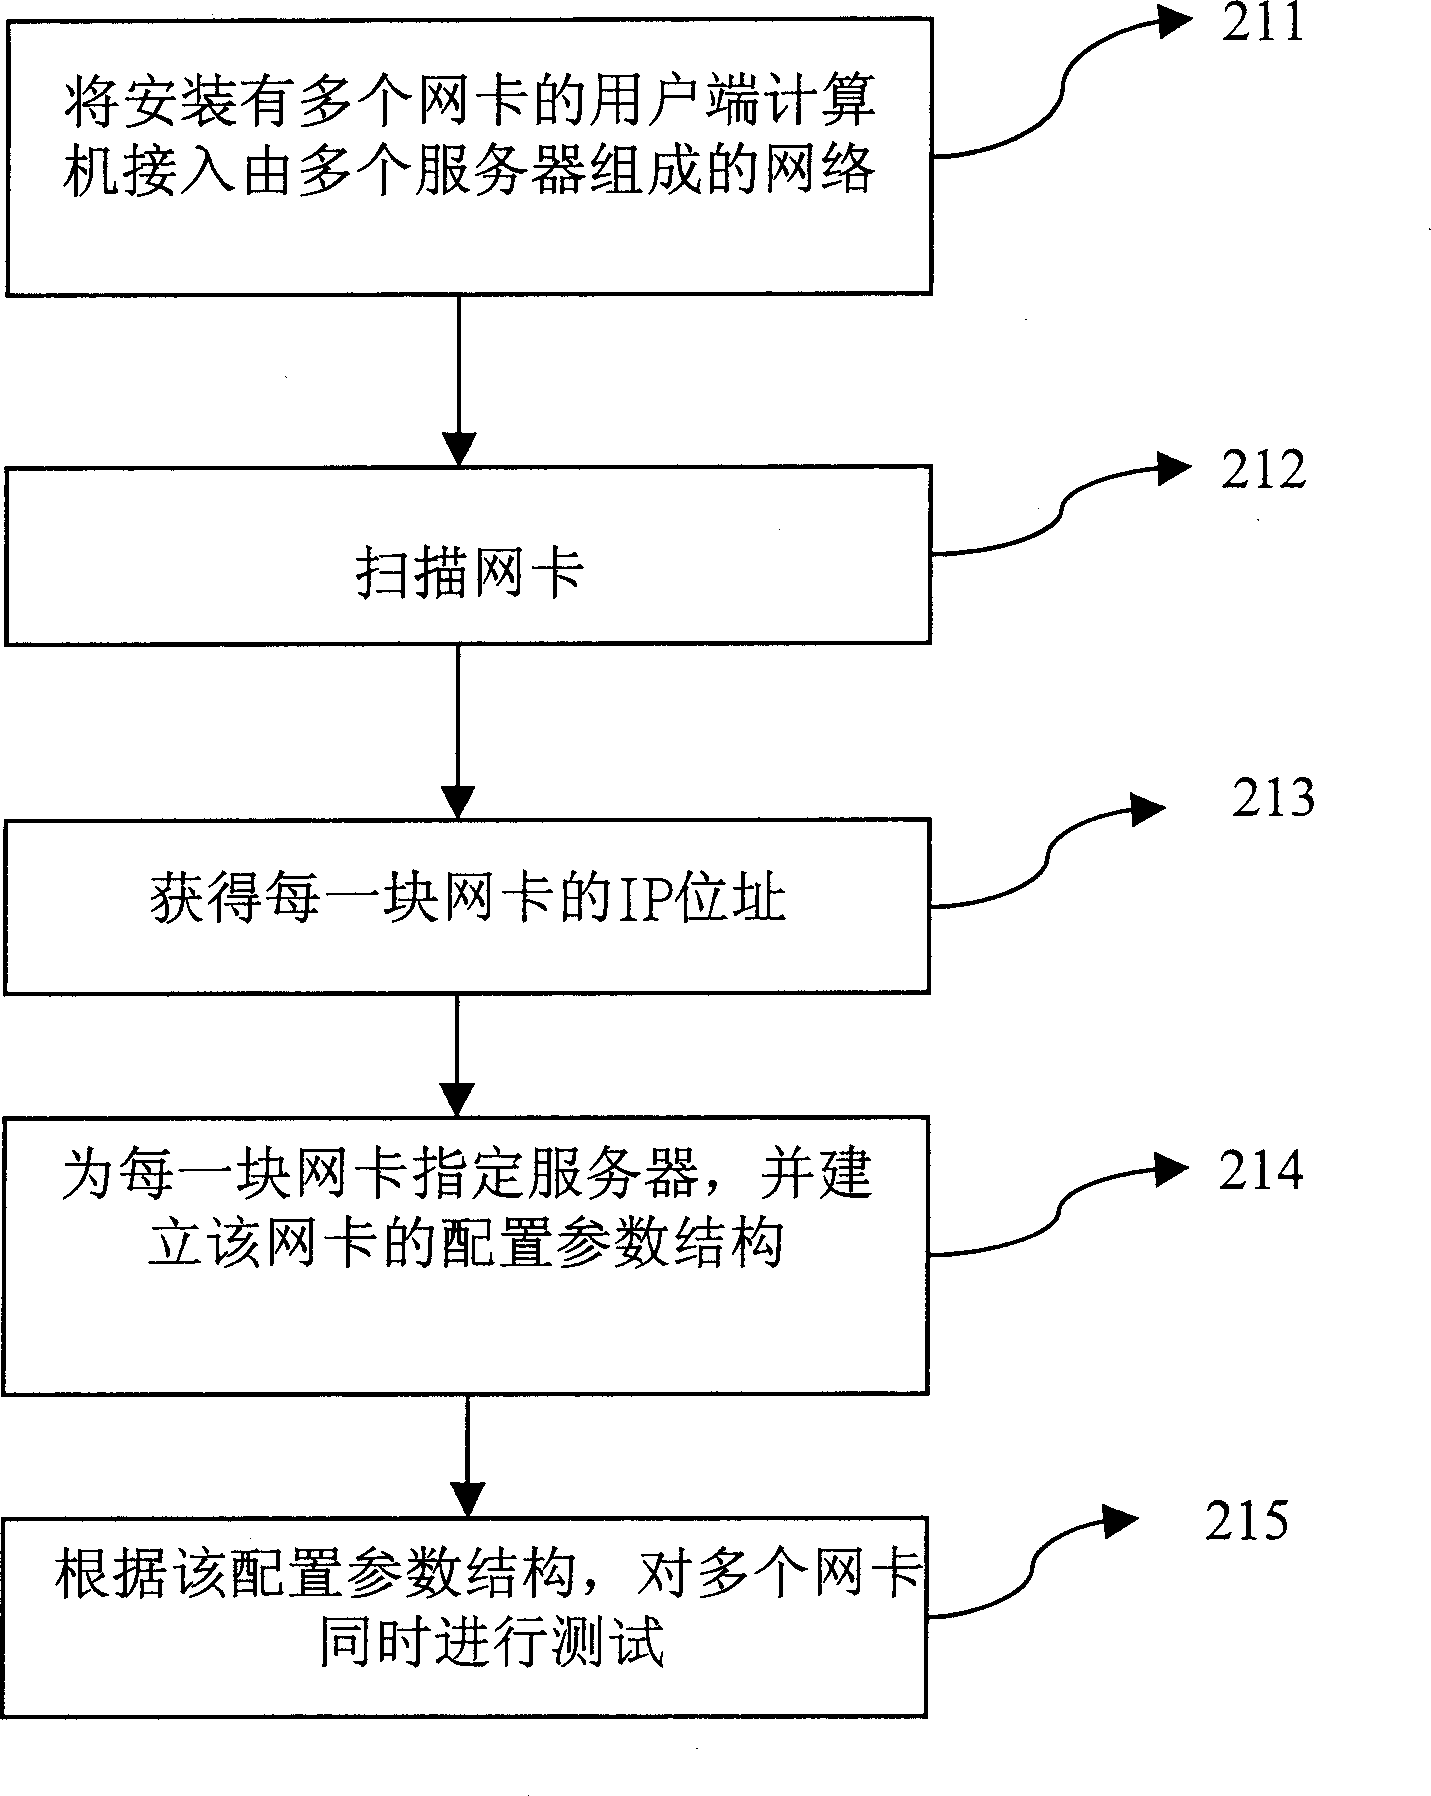 Network card testing method capable of balancing loads